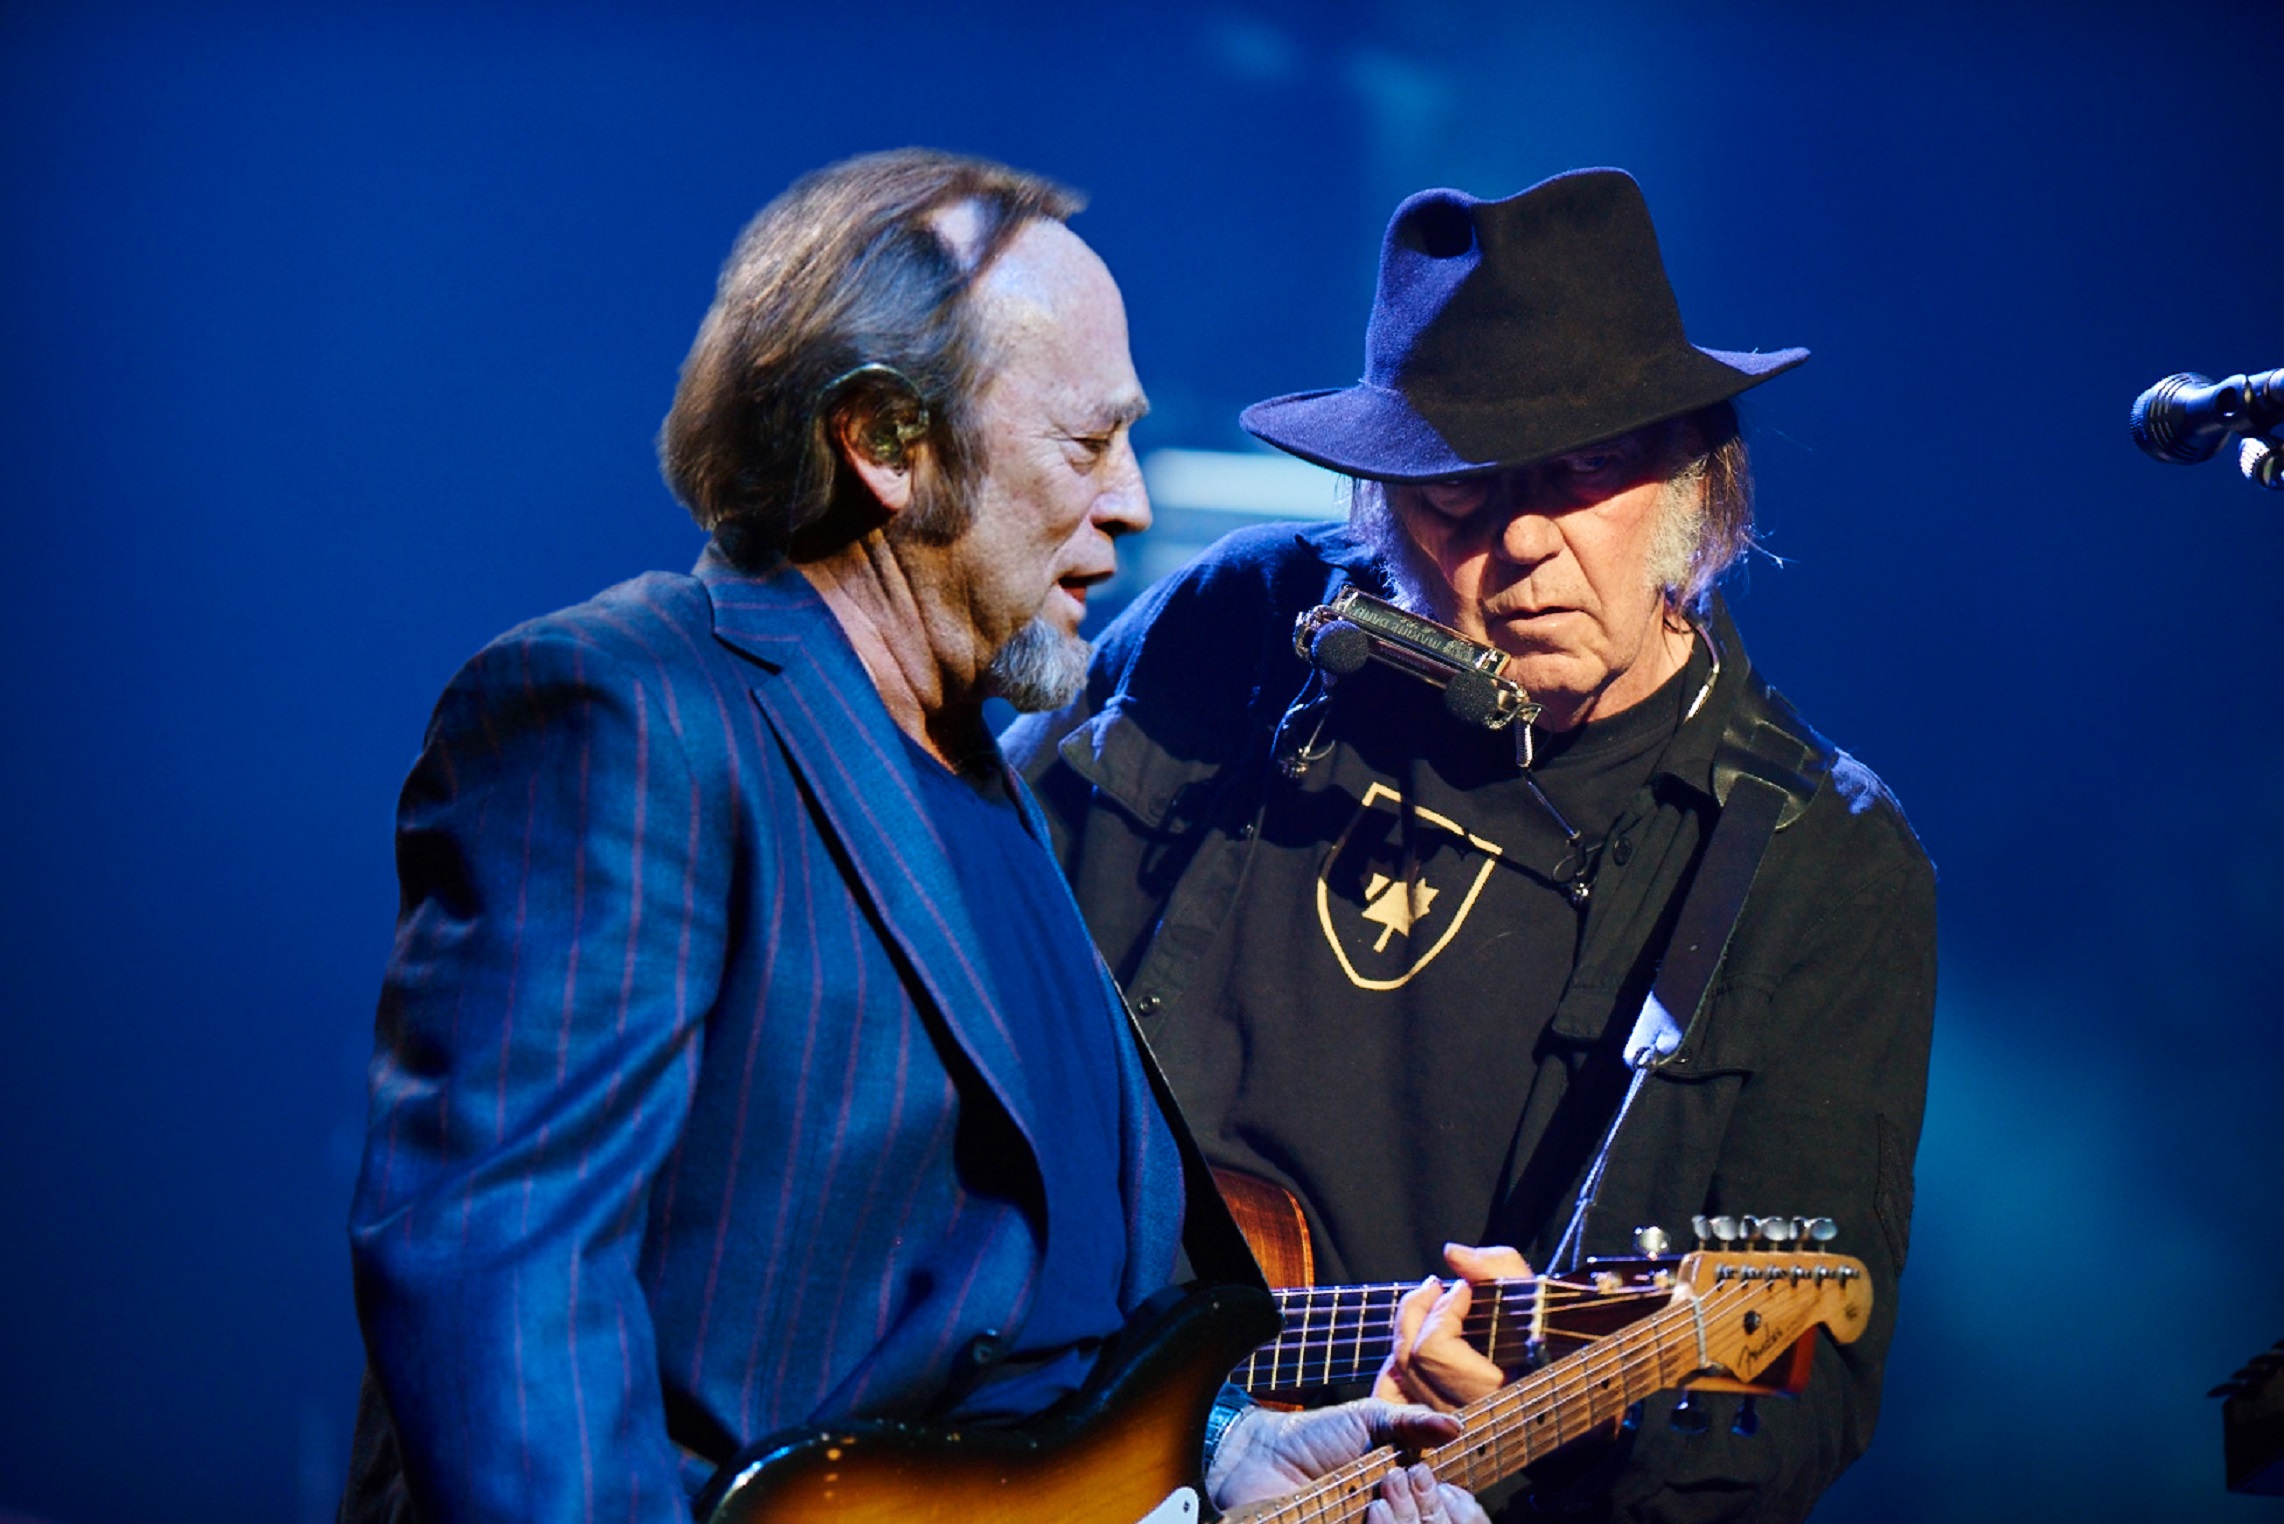 Neil Young, Stephen Stills, Lukas Nelson & Promise of The Real, Chris Stills, and Very Special Guests Join Autism Speaks Light Up The Blues 6 Concert